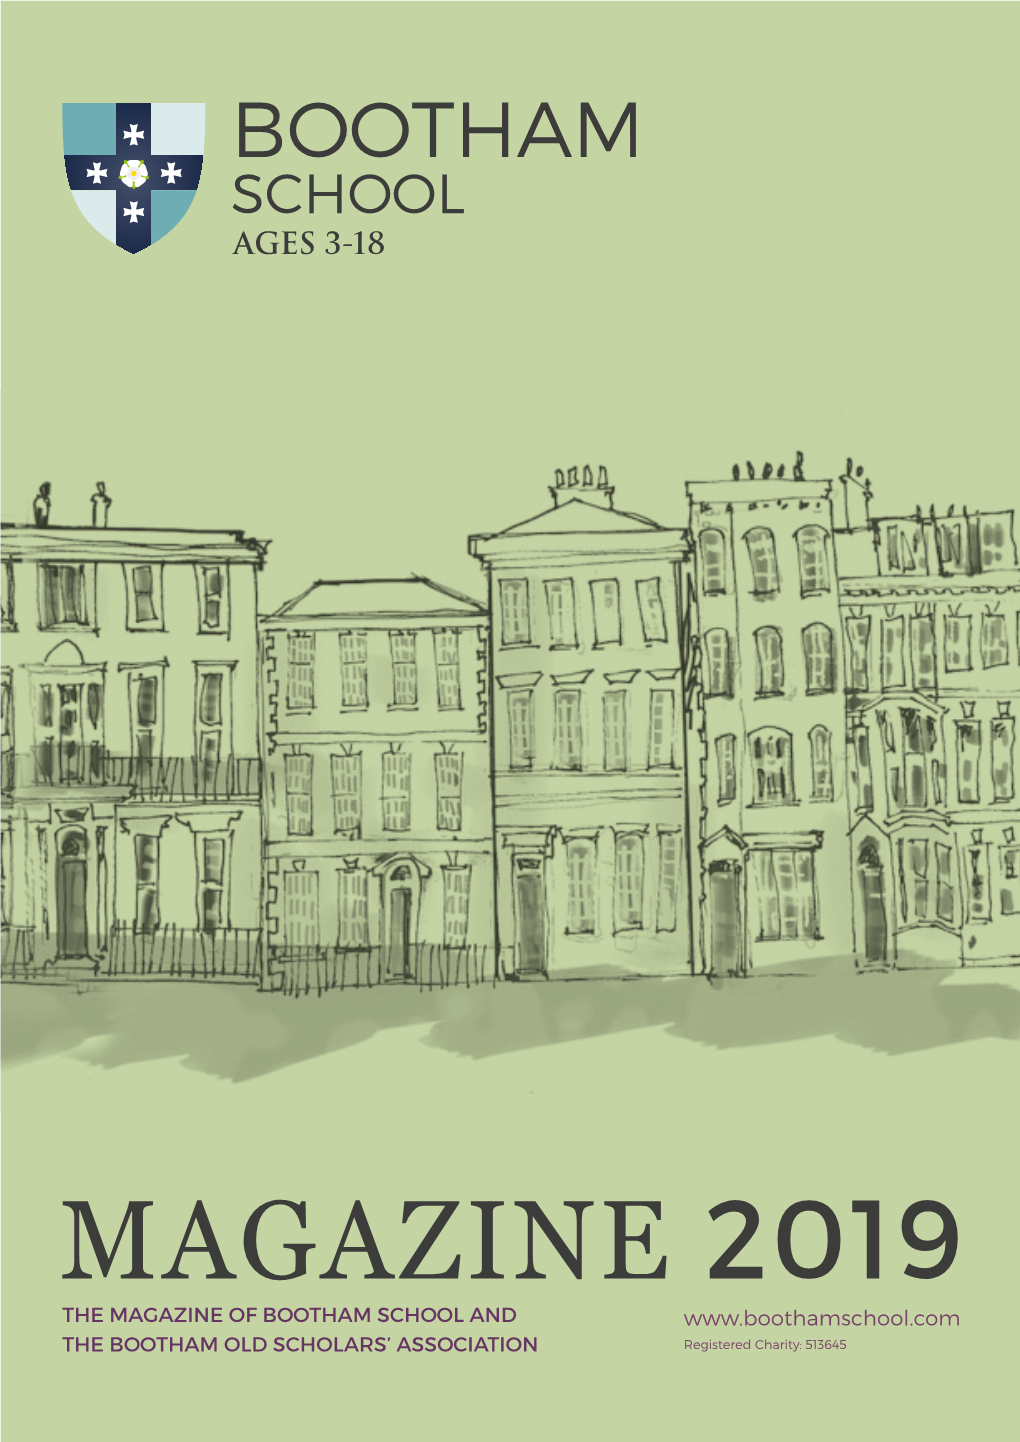 MAGAZINE 2019 the MAGAZINE of BOOTHAM SCHOOL and the BOOTHAM OLD SCHOLARS’ ASSOCIATION Volume 42 / Issue 1 / December 2019